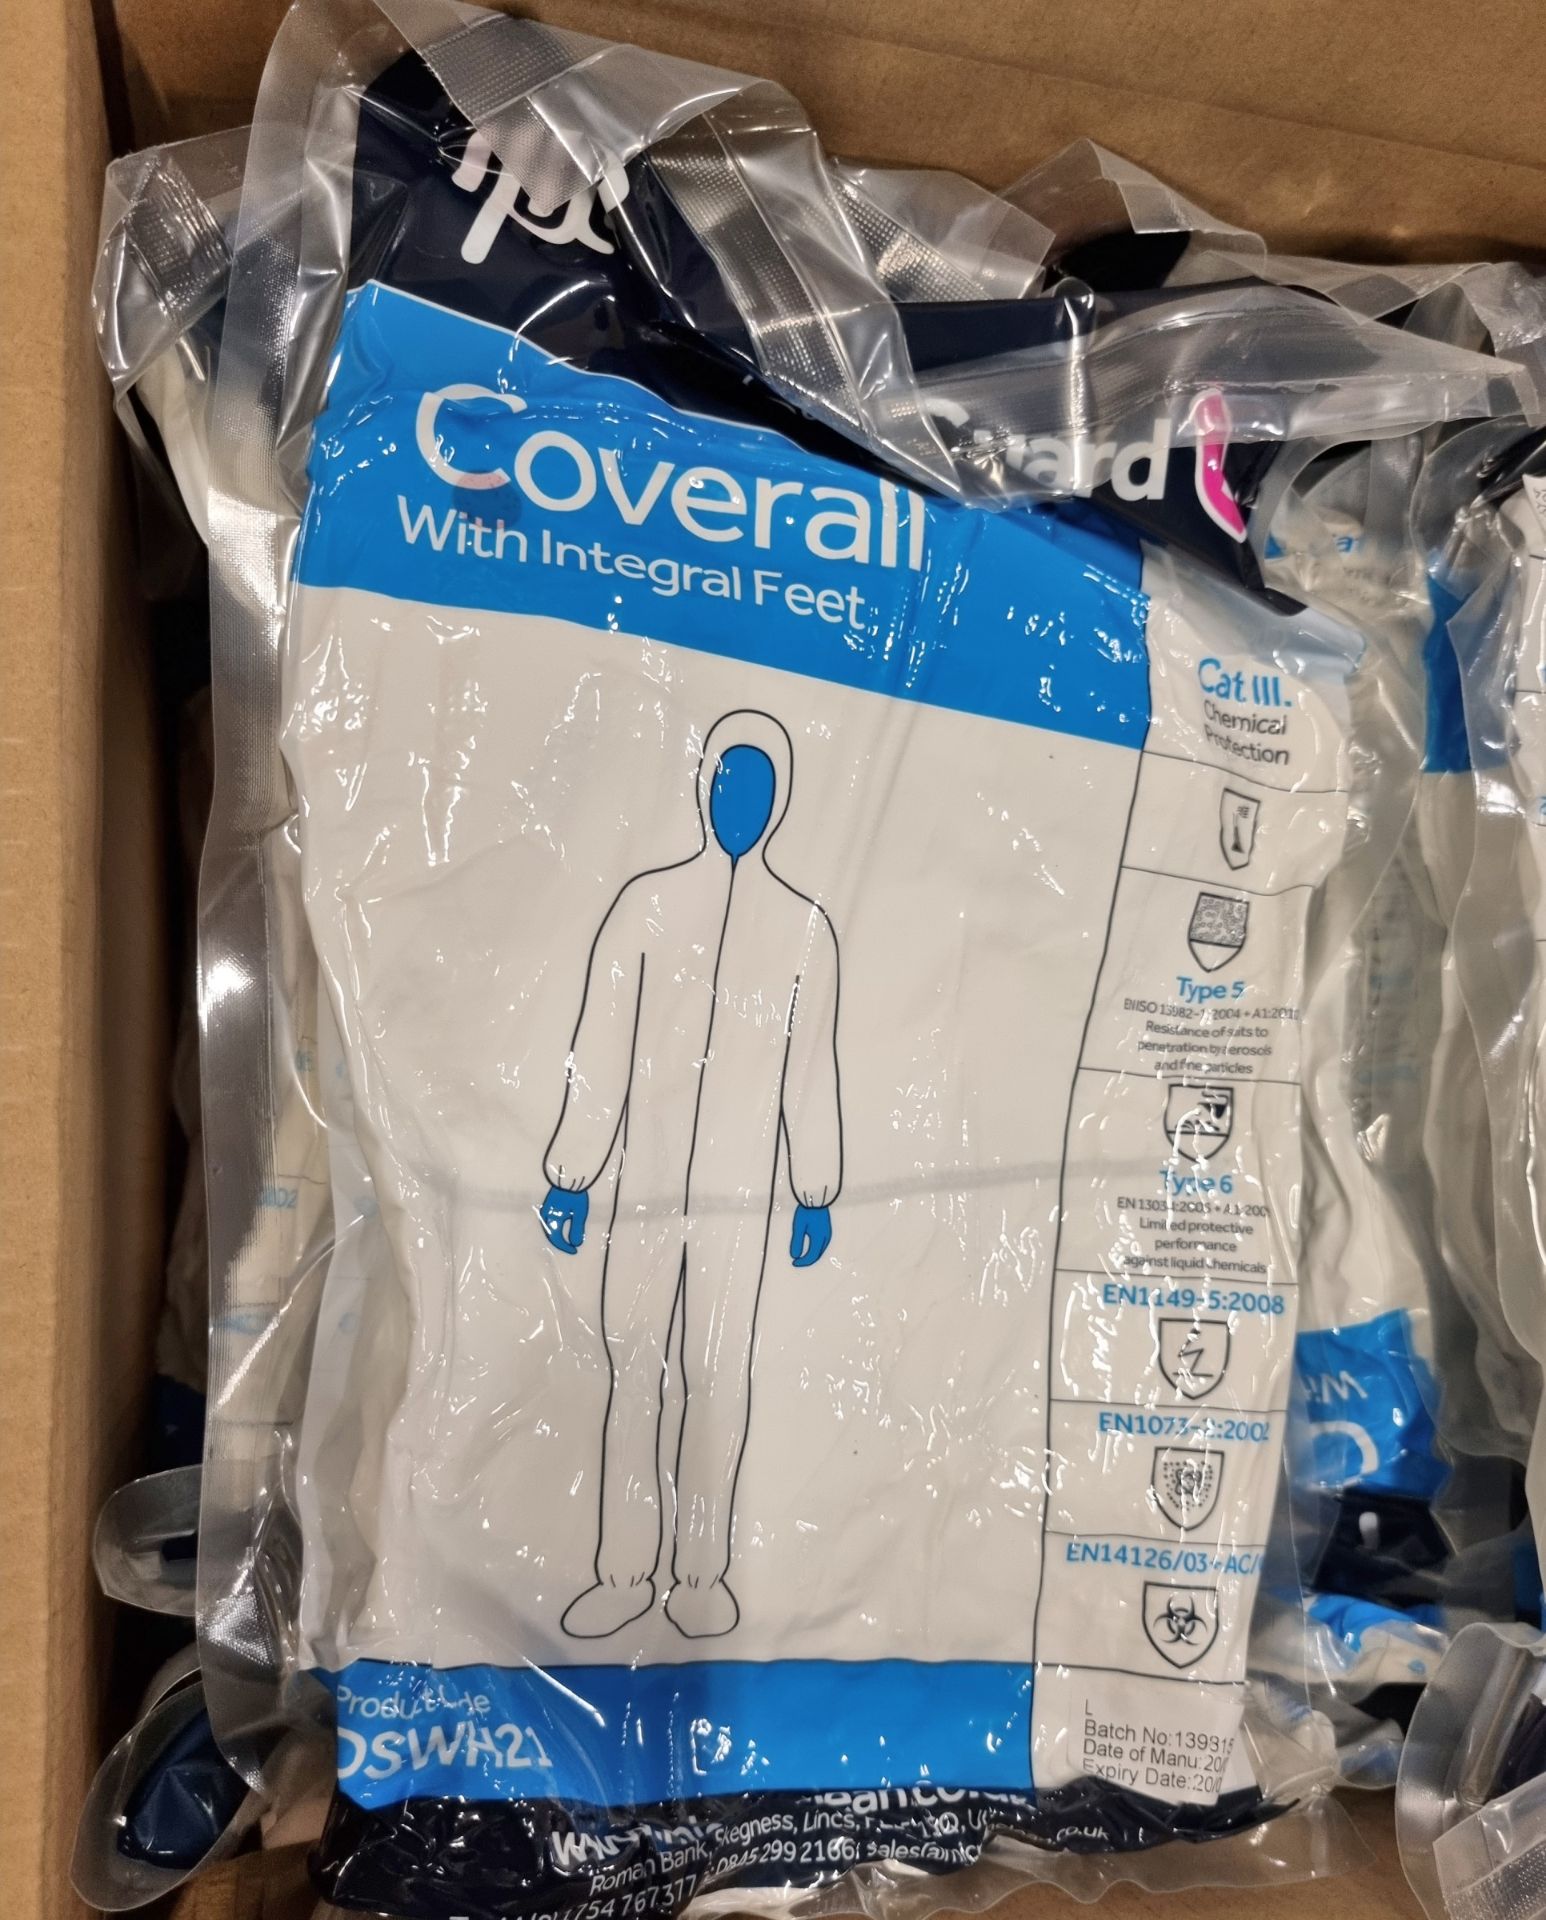 20x boxes of SureGuard3 DSWH21LRG large coverall with integral feet - 25 units per box - Bild 2 aus 5